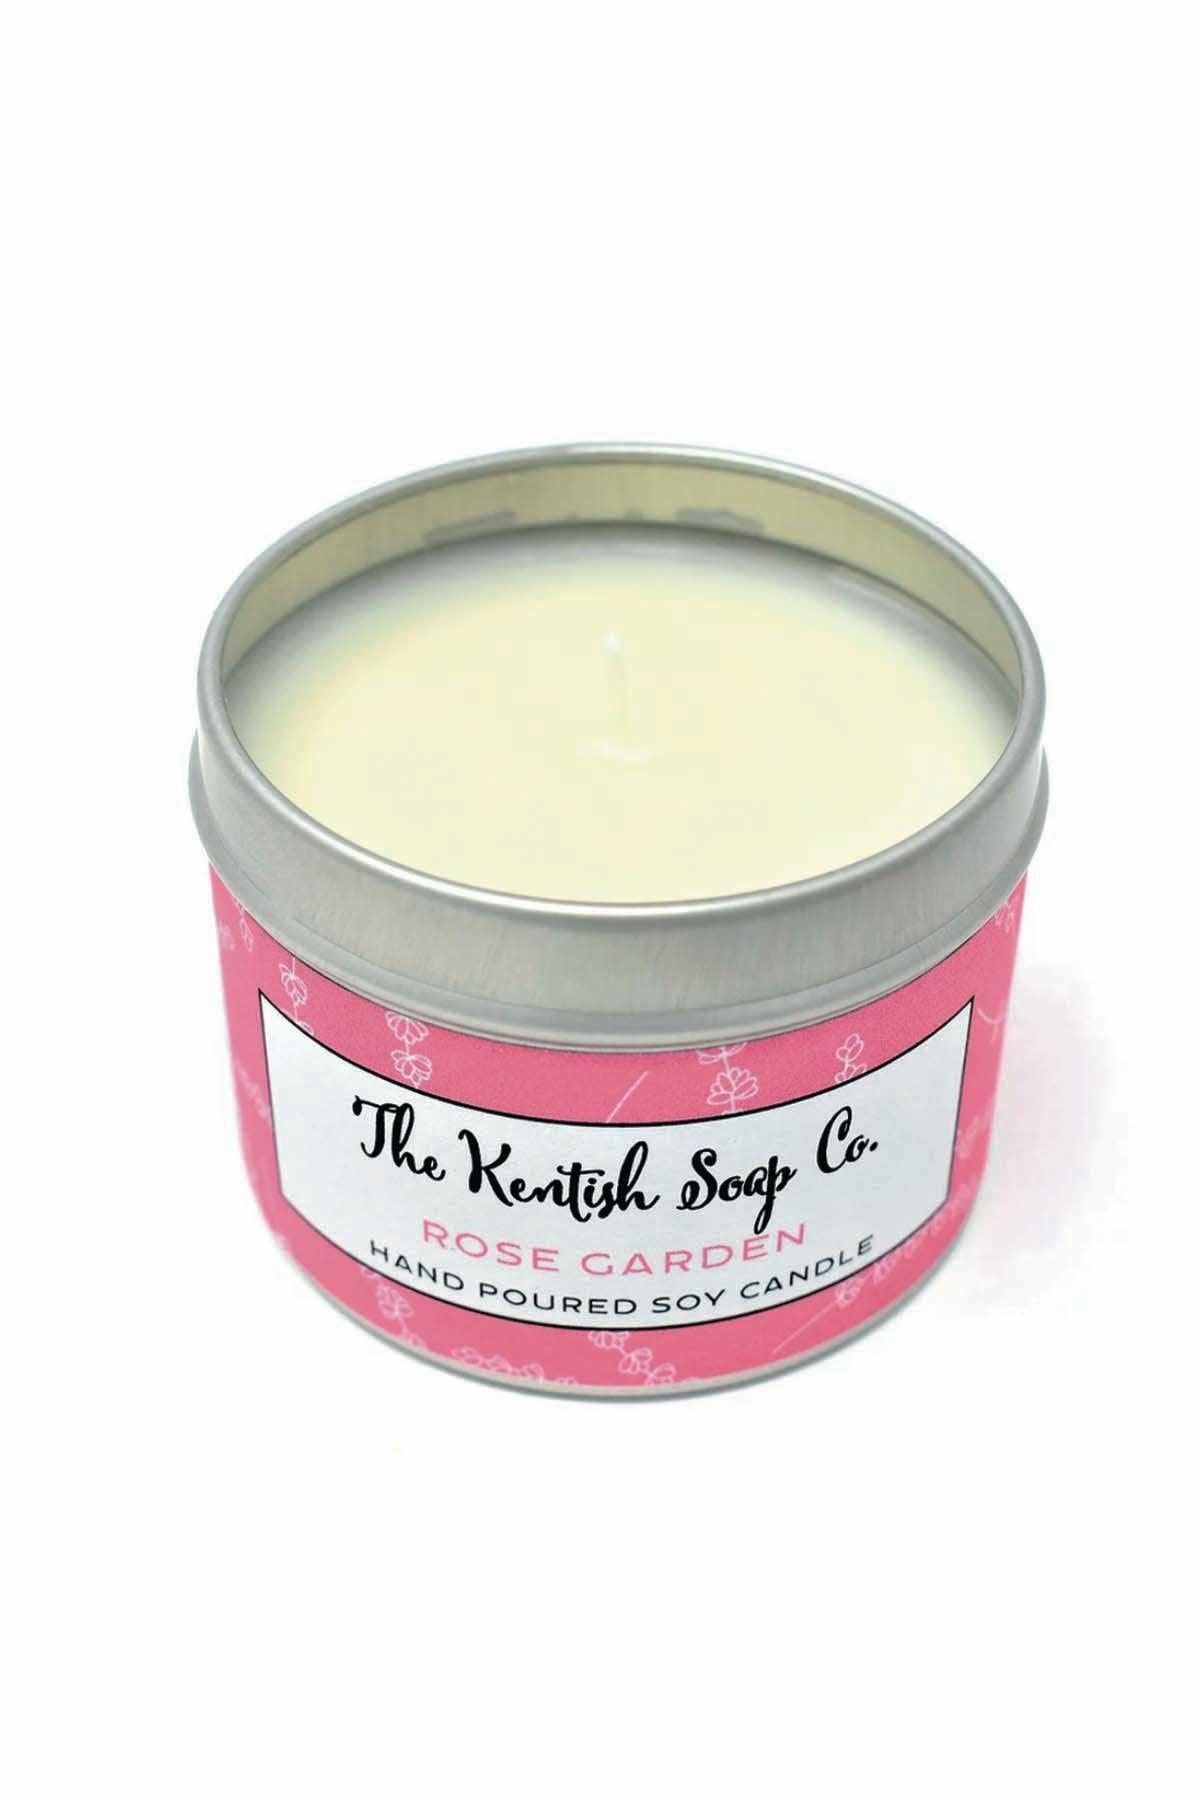 The Kentish Soap Company Candle - Carr & Westley